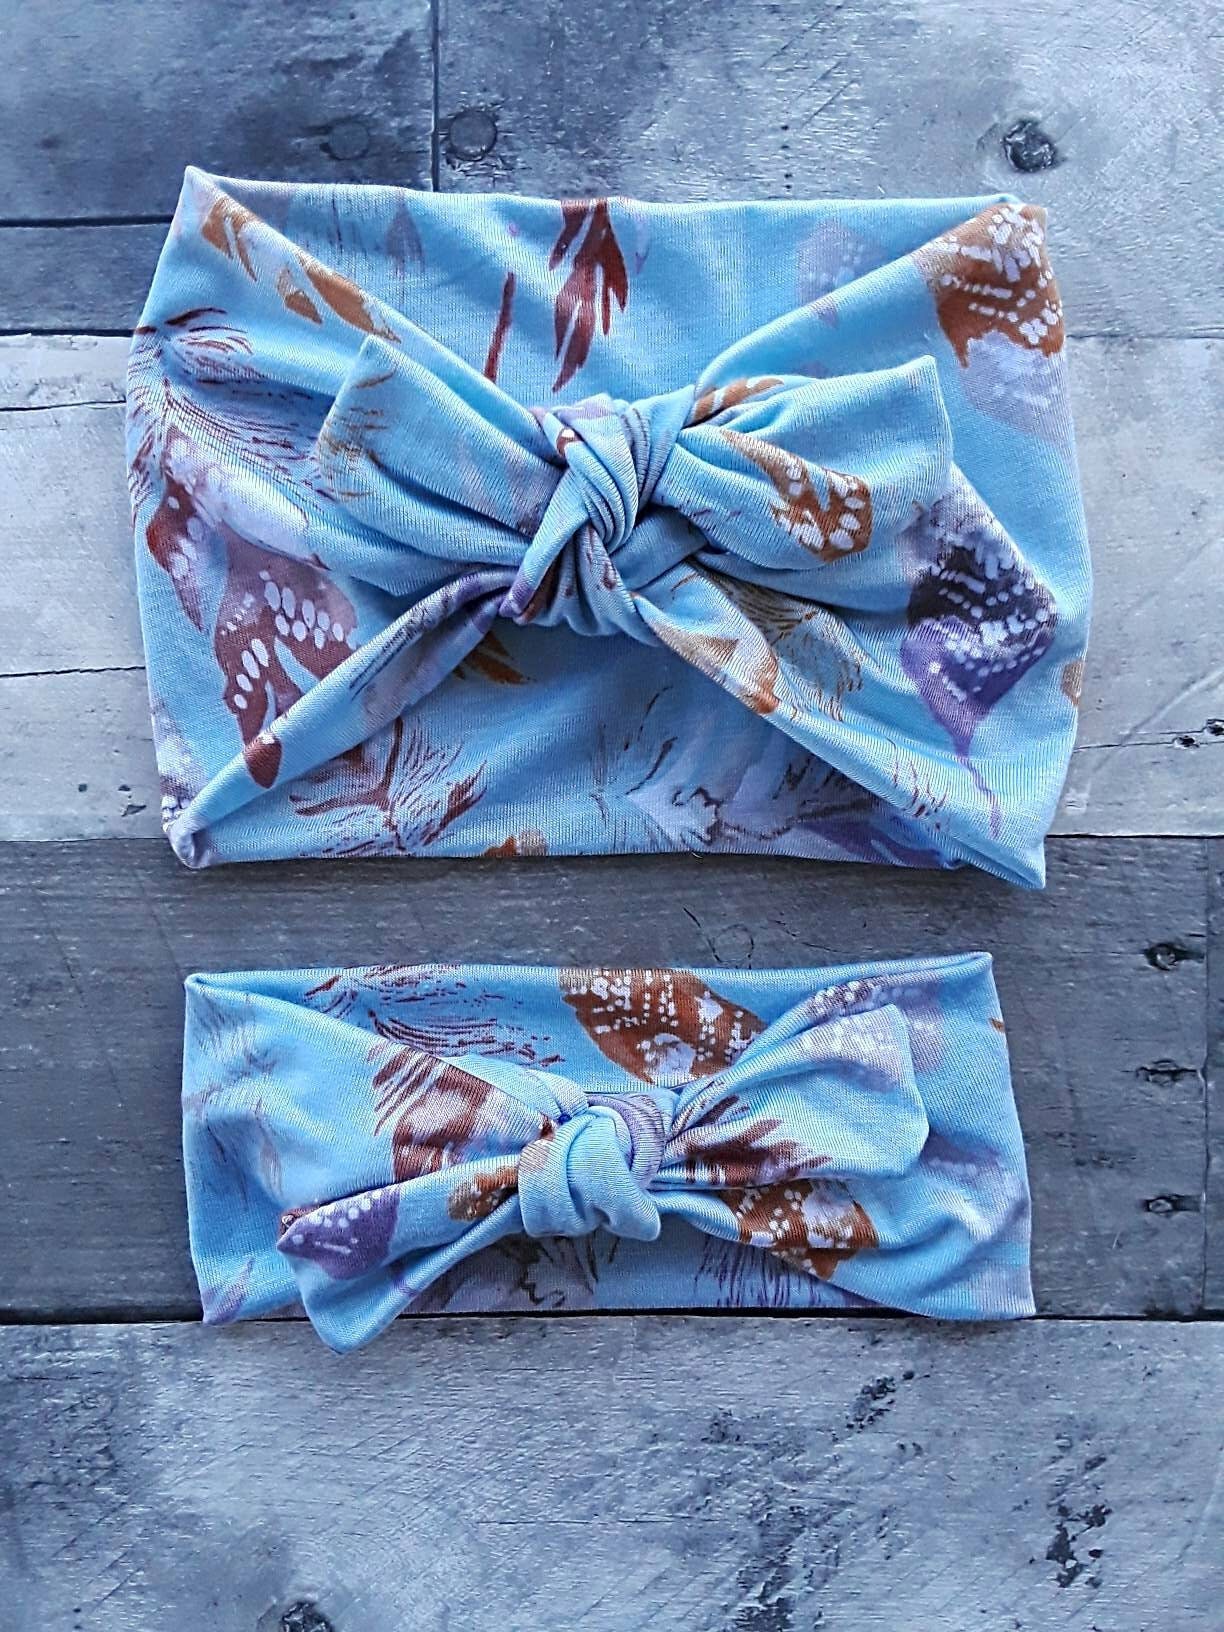 Signature Knotted Extra Wide Headbands in Pale Blue With Feathers For Mommy & Baby - Matching Me Top Knot Headwrap